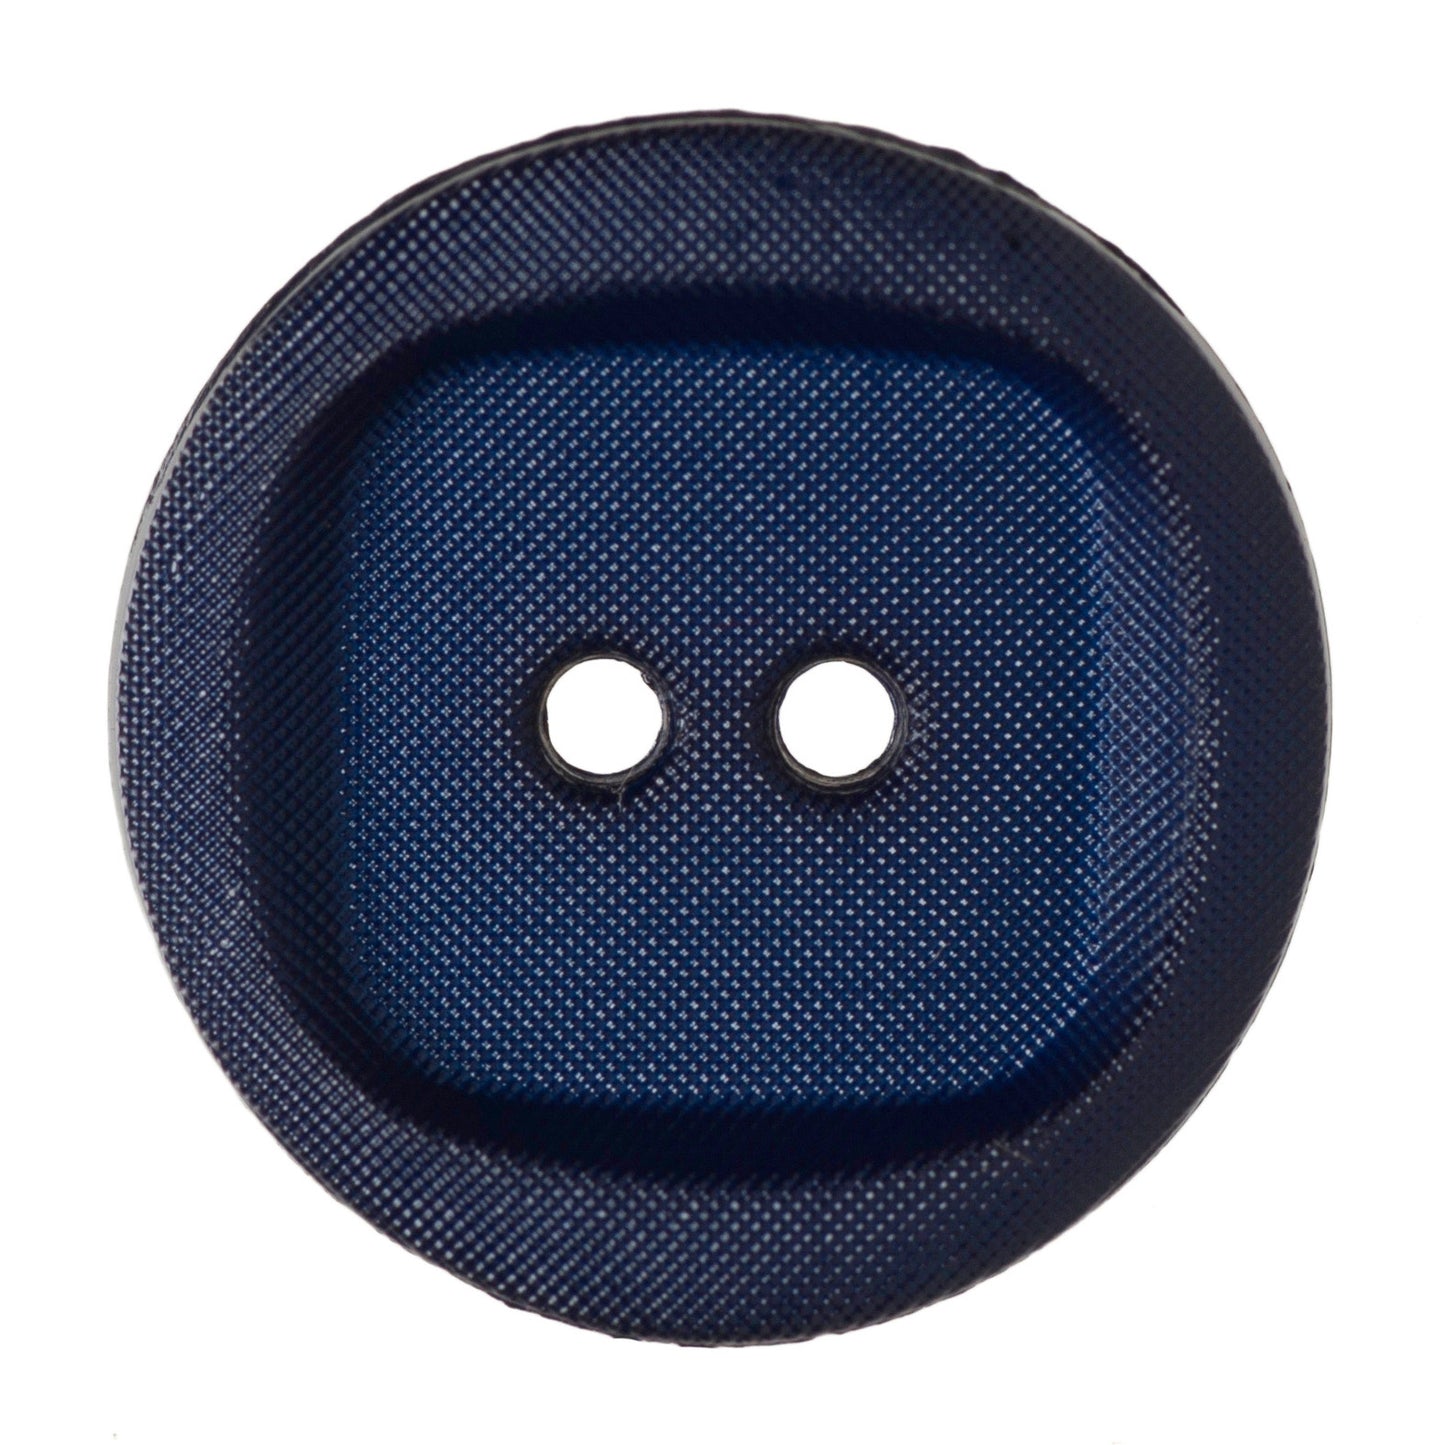 2 Hole Wavy with Square Insert Button - 20mm - Navy